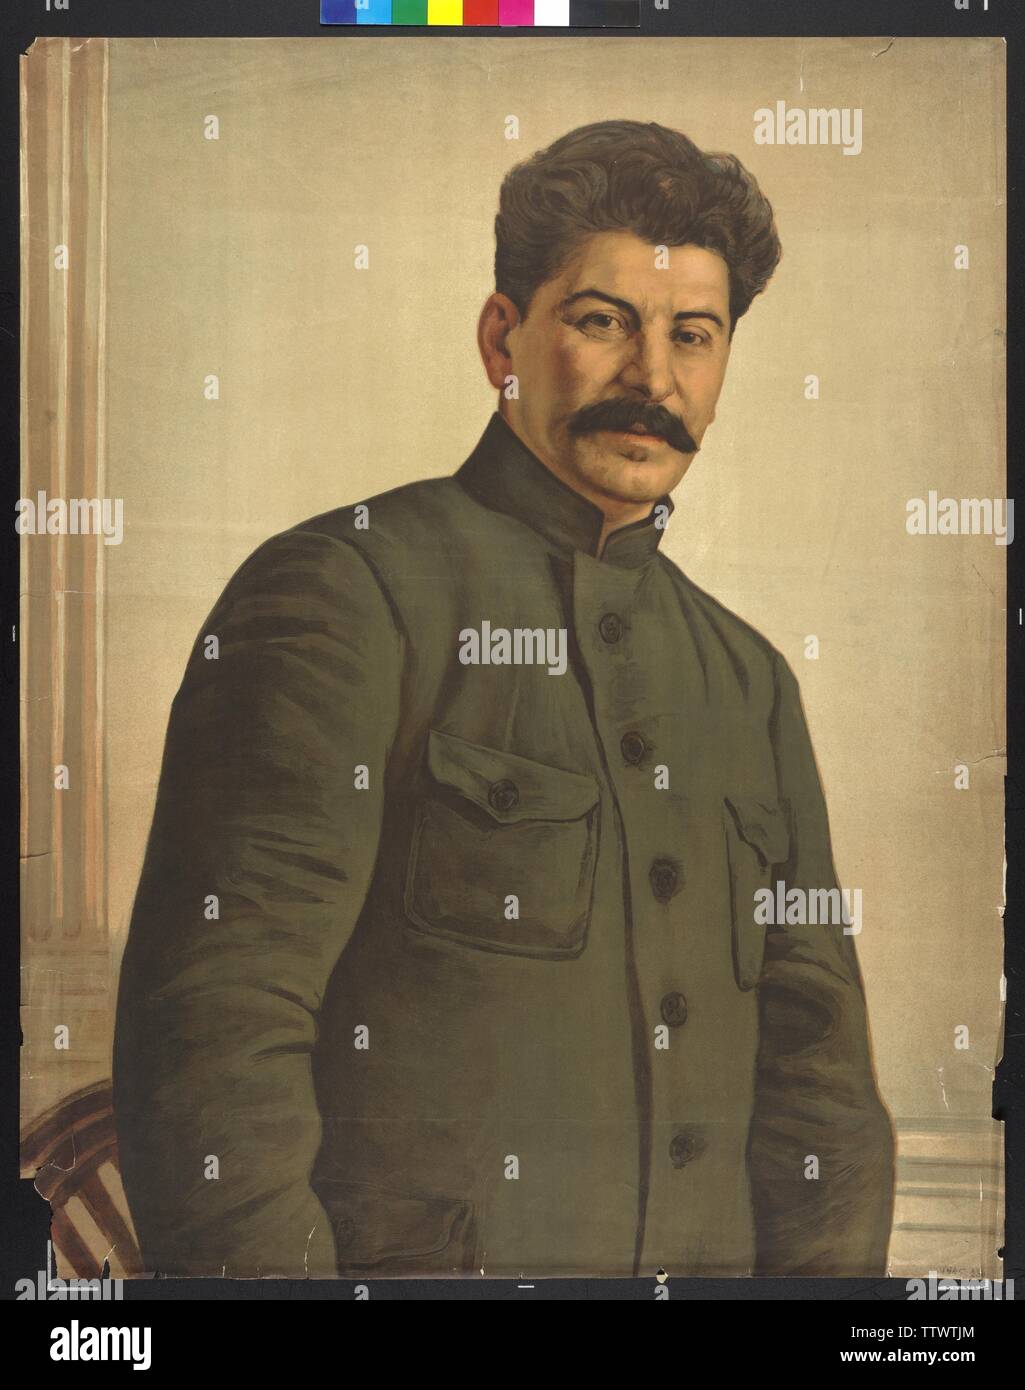 Stalin, Joseph Wissarionovitch, colour printing based on painting, Additional-Rights-Clearance-Info-Not-Available Stock Photo